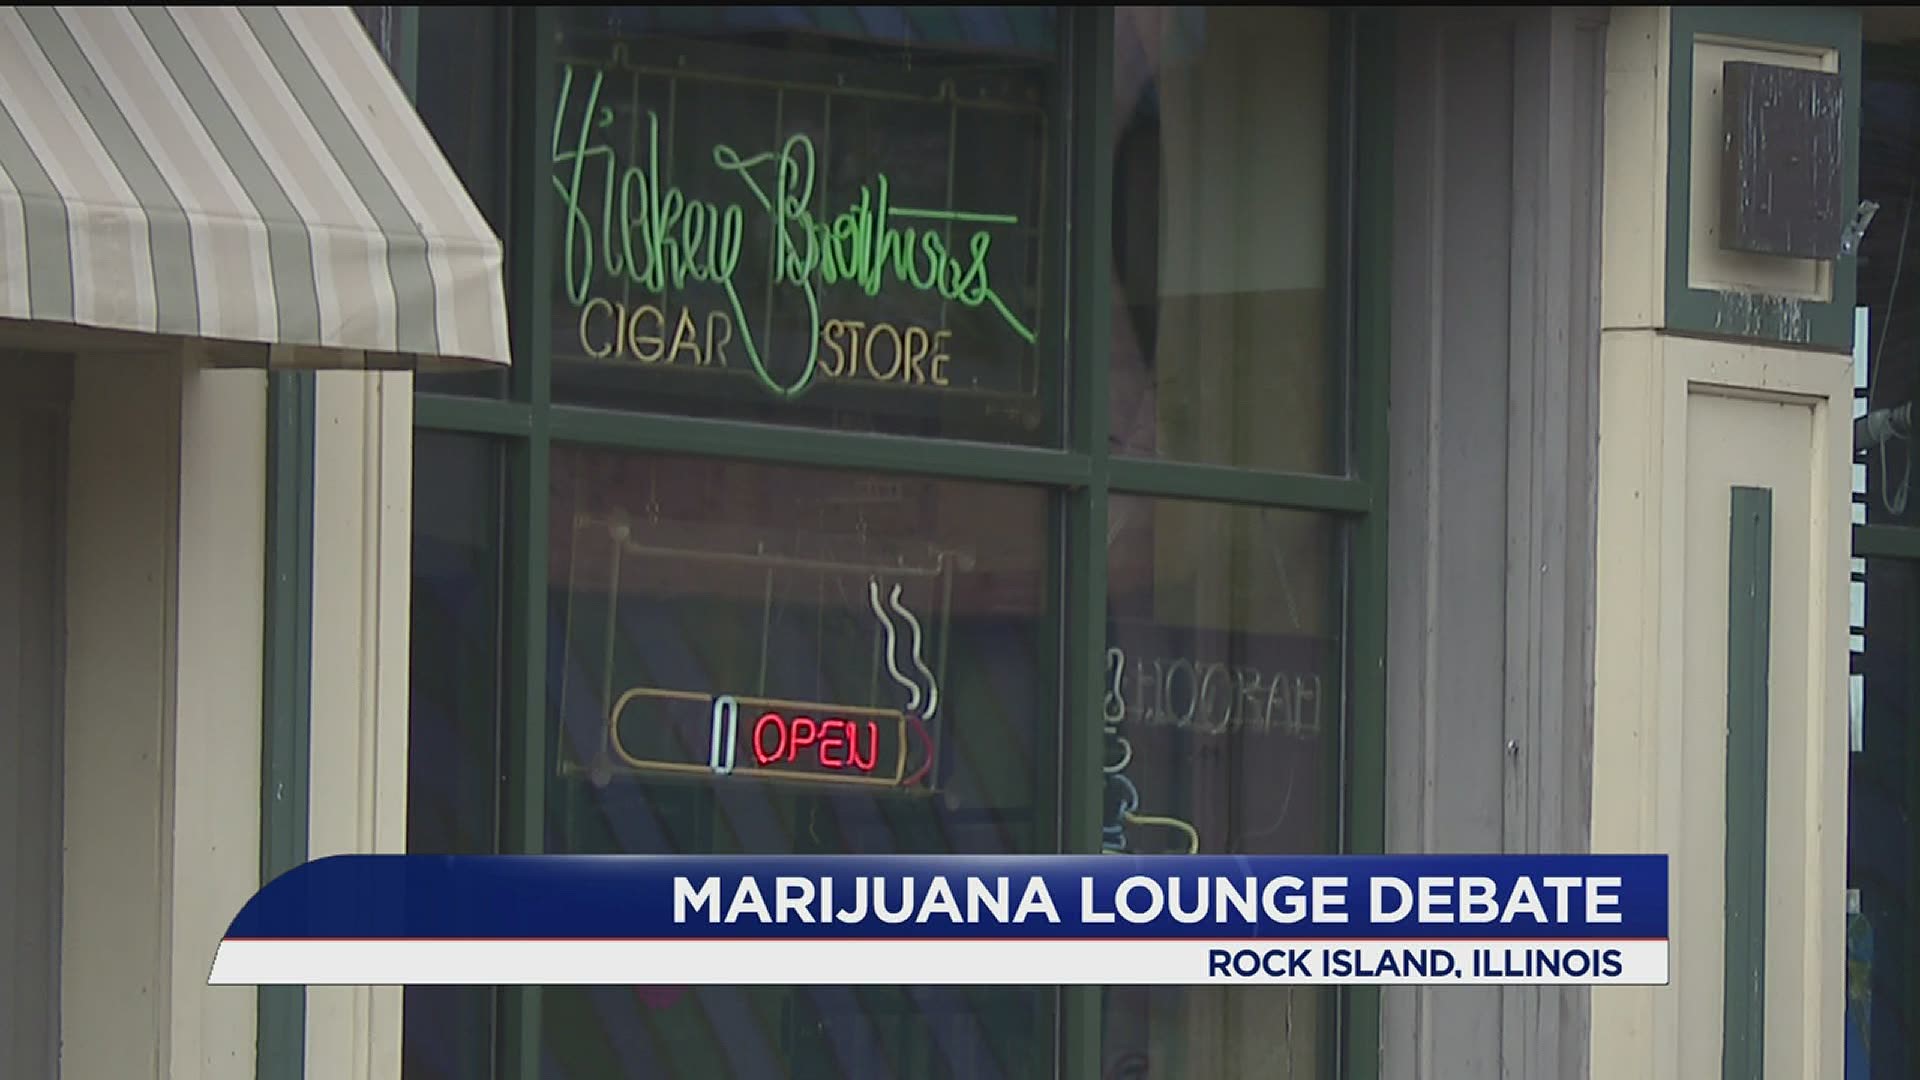 Hickey Brothers wants to become the first marijuana lounge in the state. But they need city approval first.